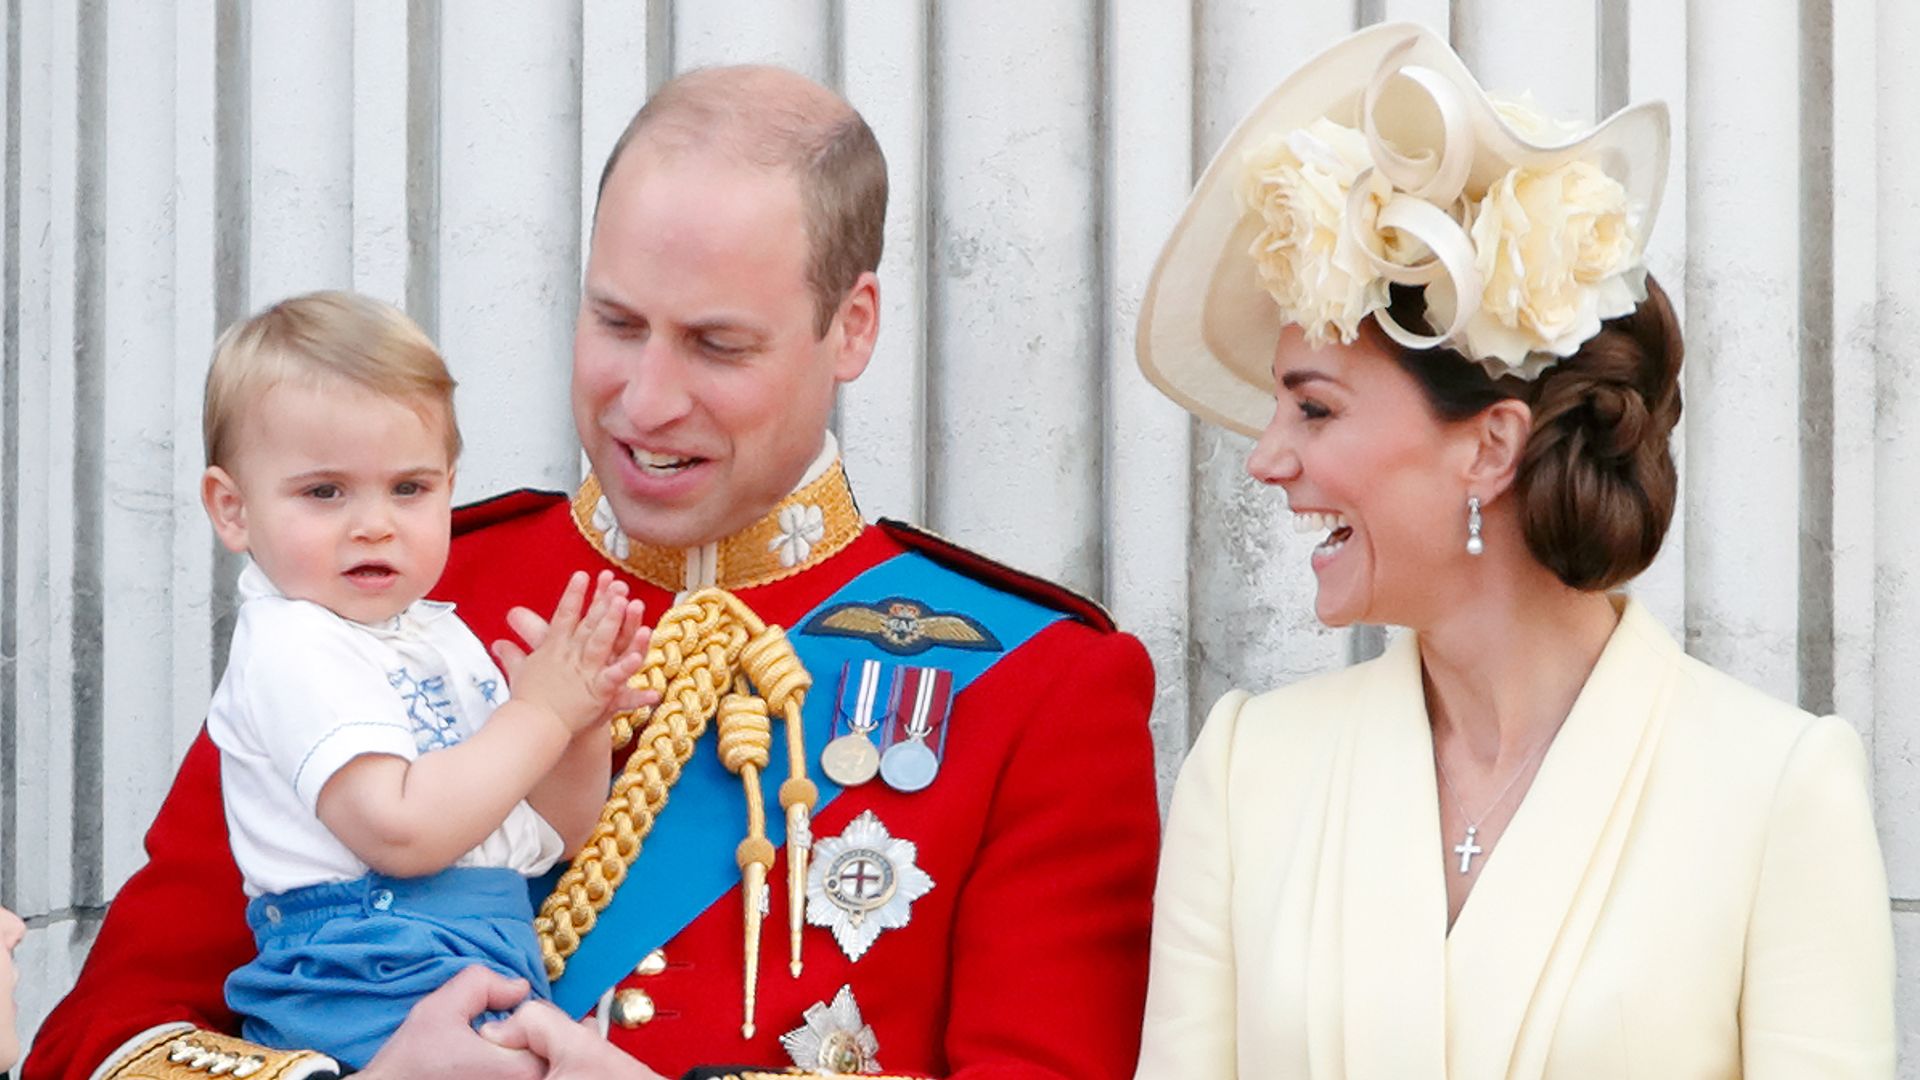 Relive the royals' first appearances at Trooping the Colour - all the photos